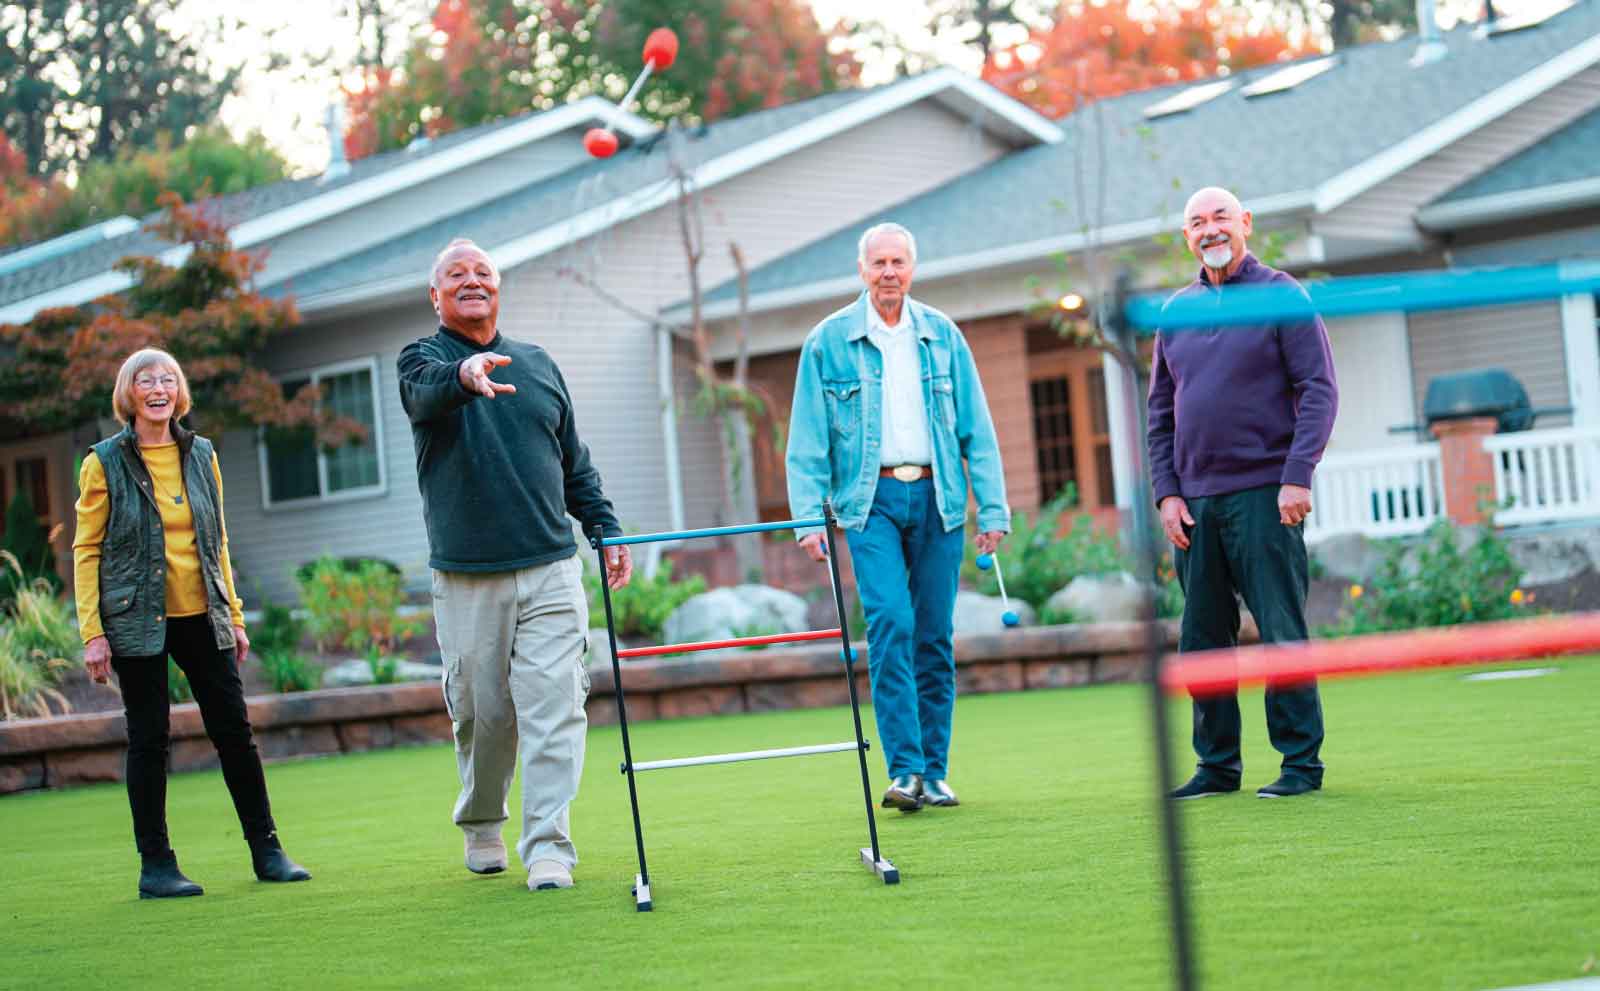 A group of senior adults play an outdoor game